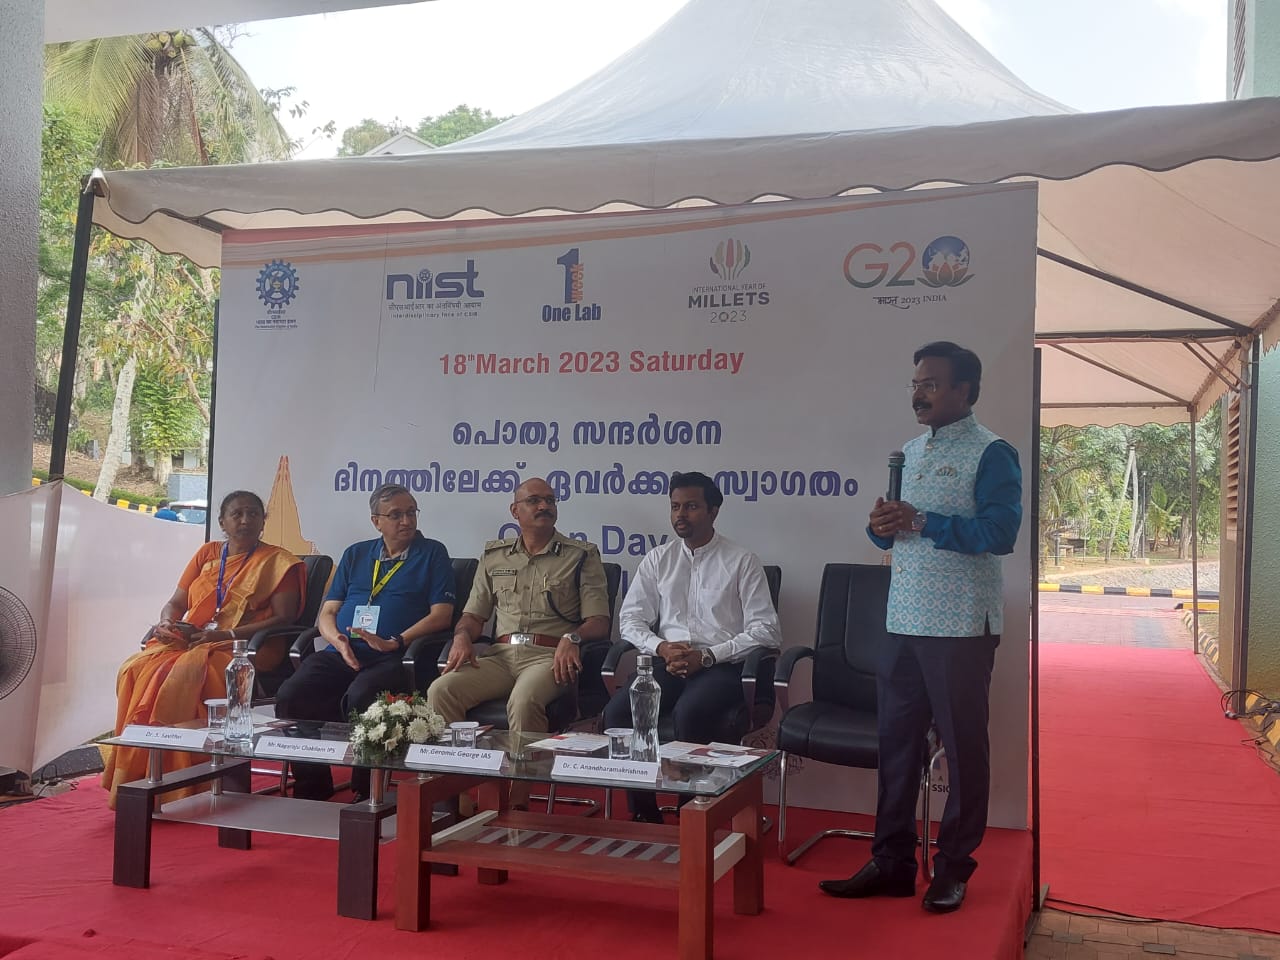 Geromic George IAS District Collector, Trivandrum and Nagaraju Chakilam IPS Commissioner of Police, Trivandrum City inaugurated the final day event of OWOL, 'Open Day'